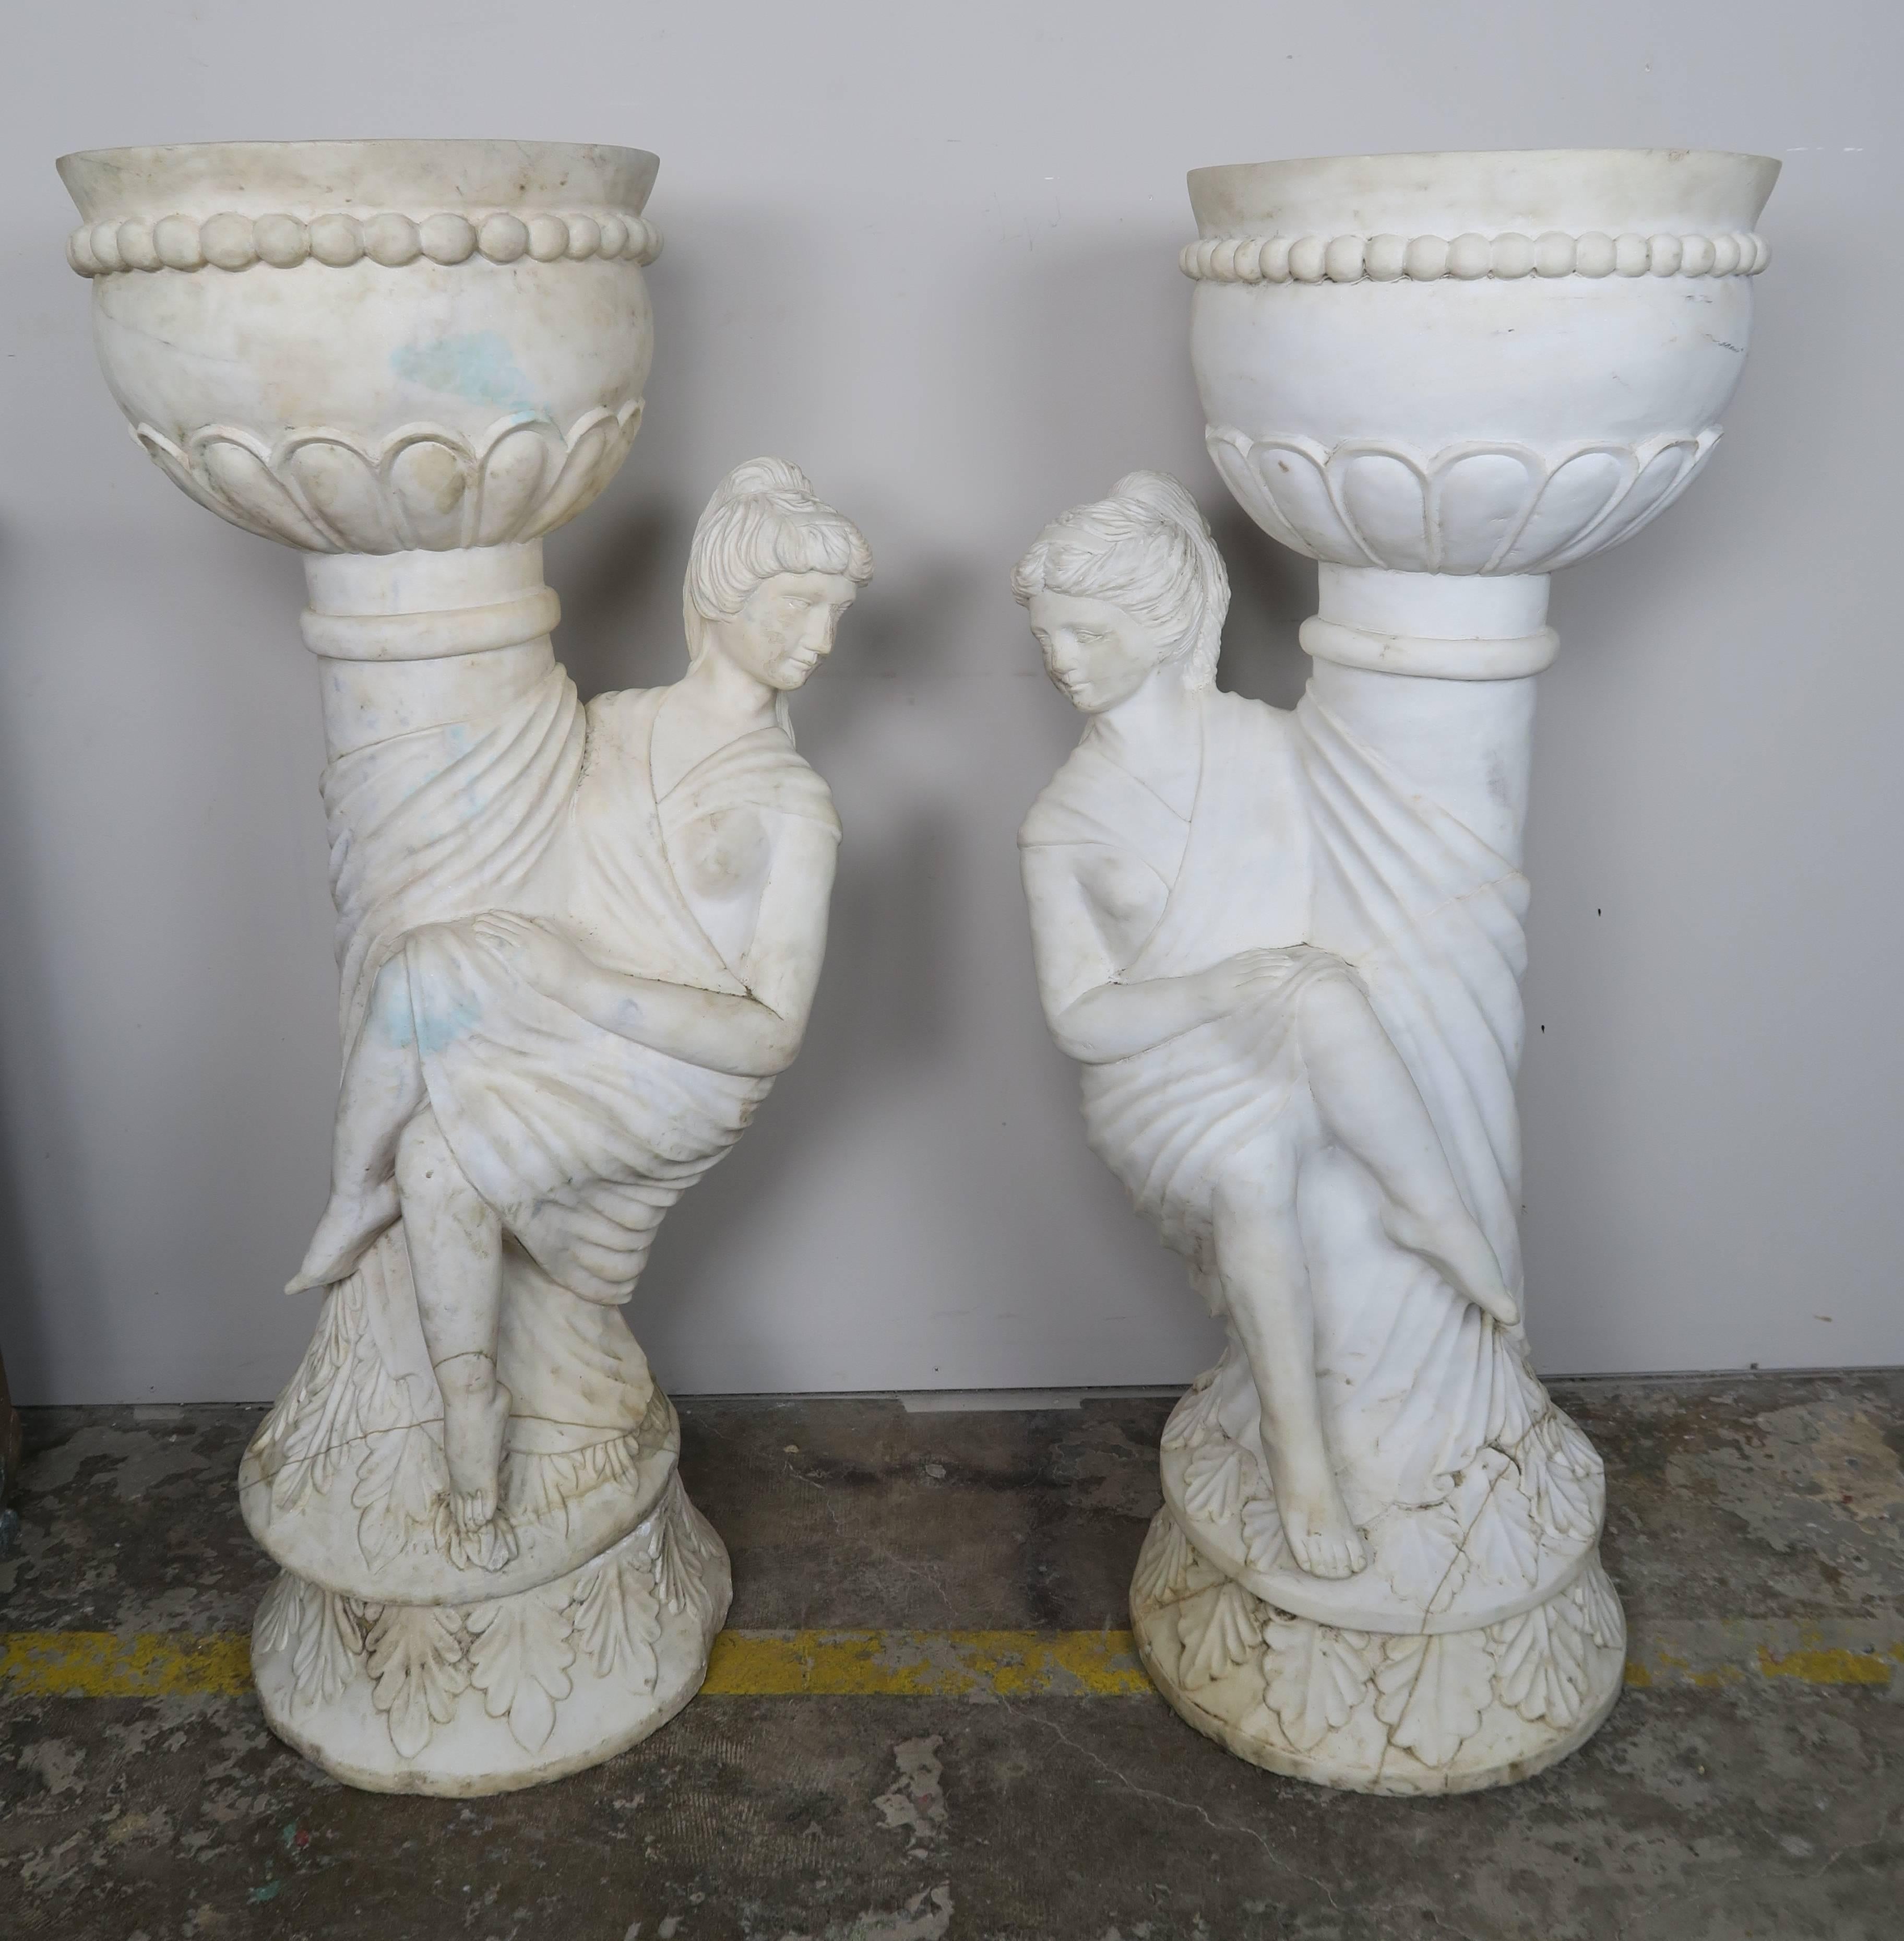 Pair of Italian Carrara marble figural planters of woman draped in classical Roman attire. Beautiful carved details throughout including carved acanthus leaves, beading and draped fabrics.